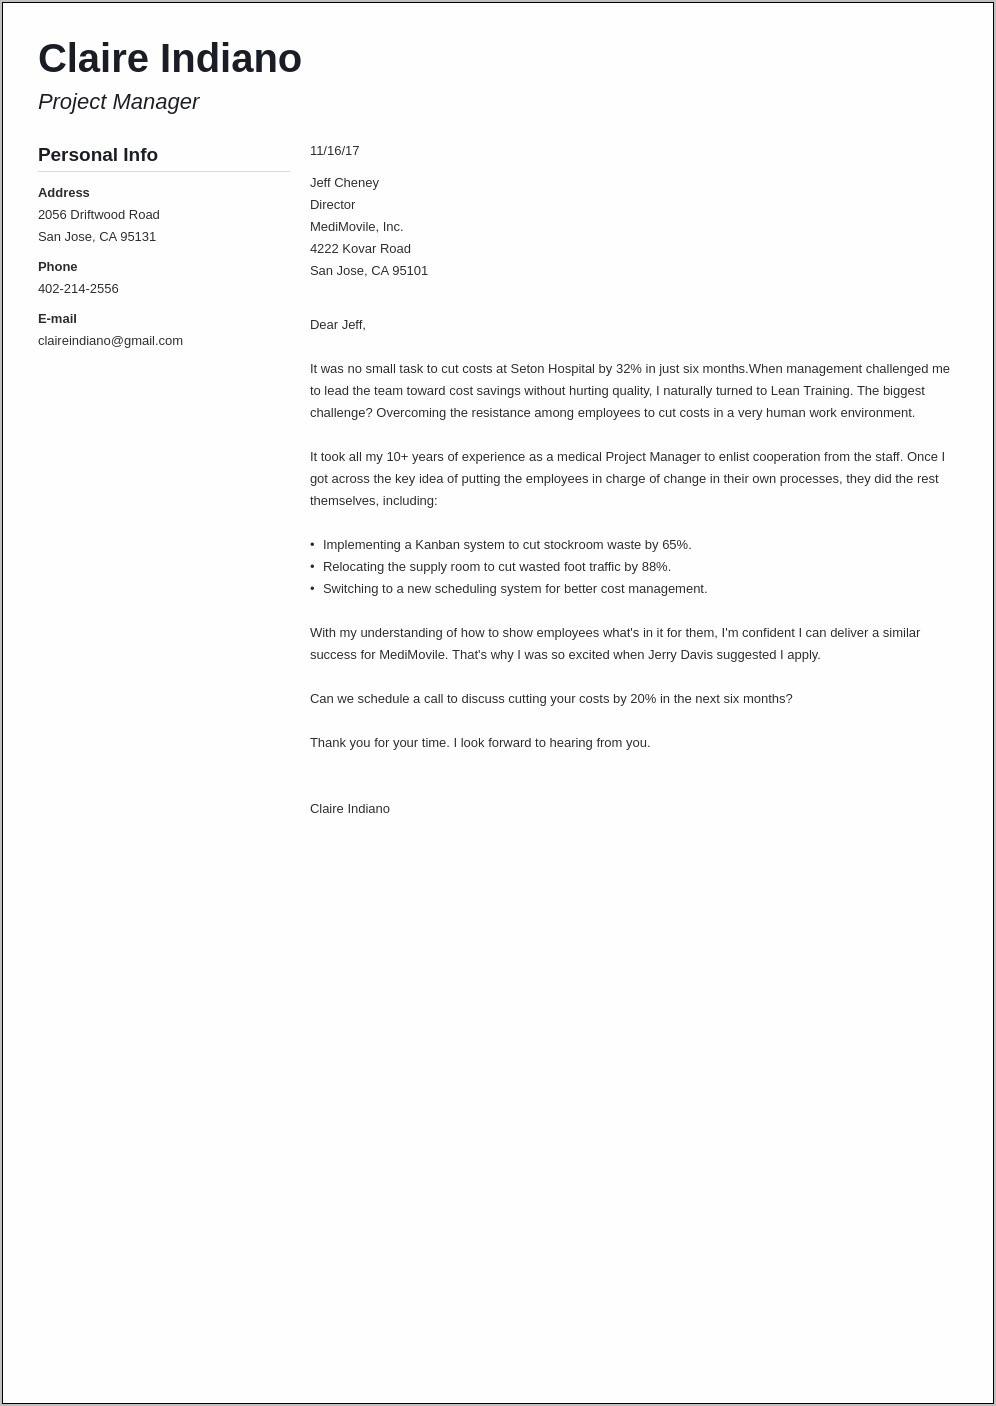 Resume And Cover Letter Before Applying For Jobs